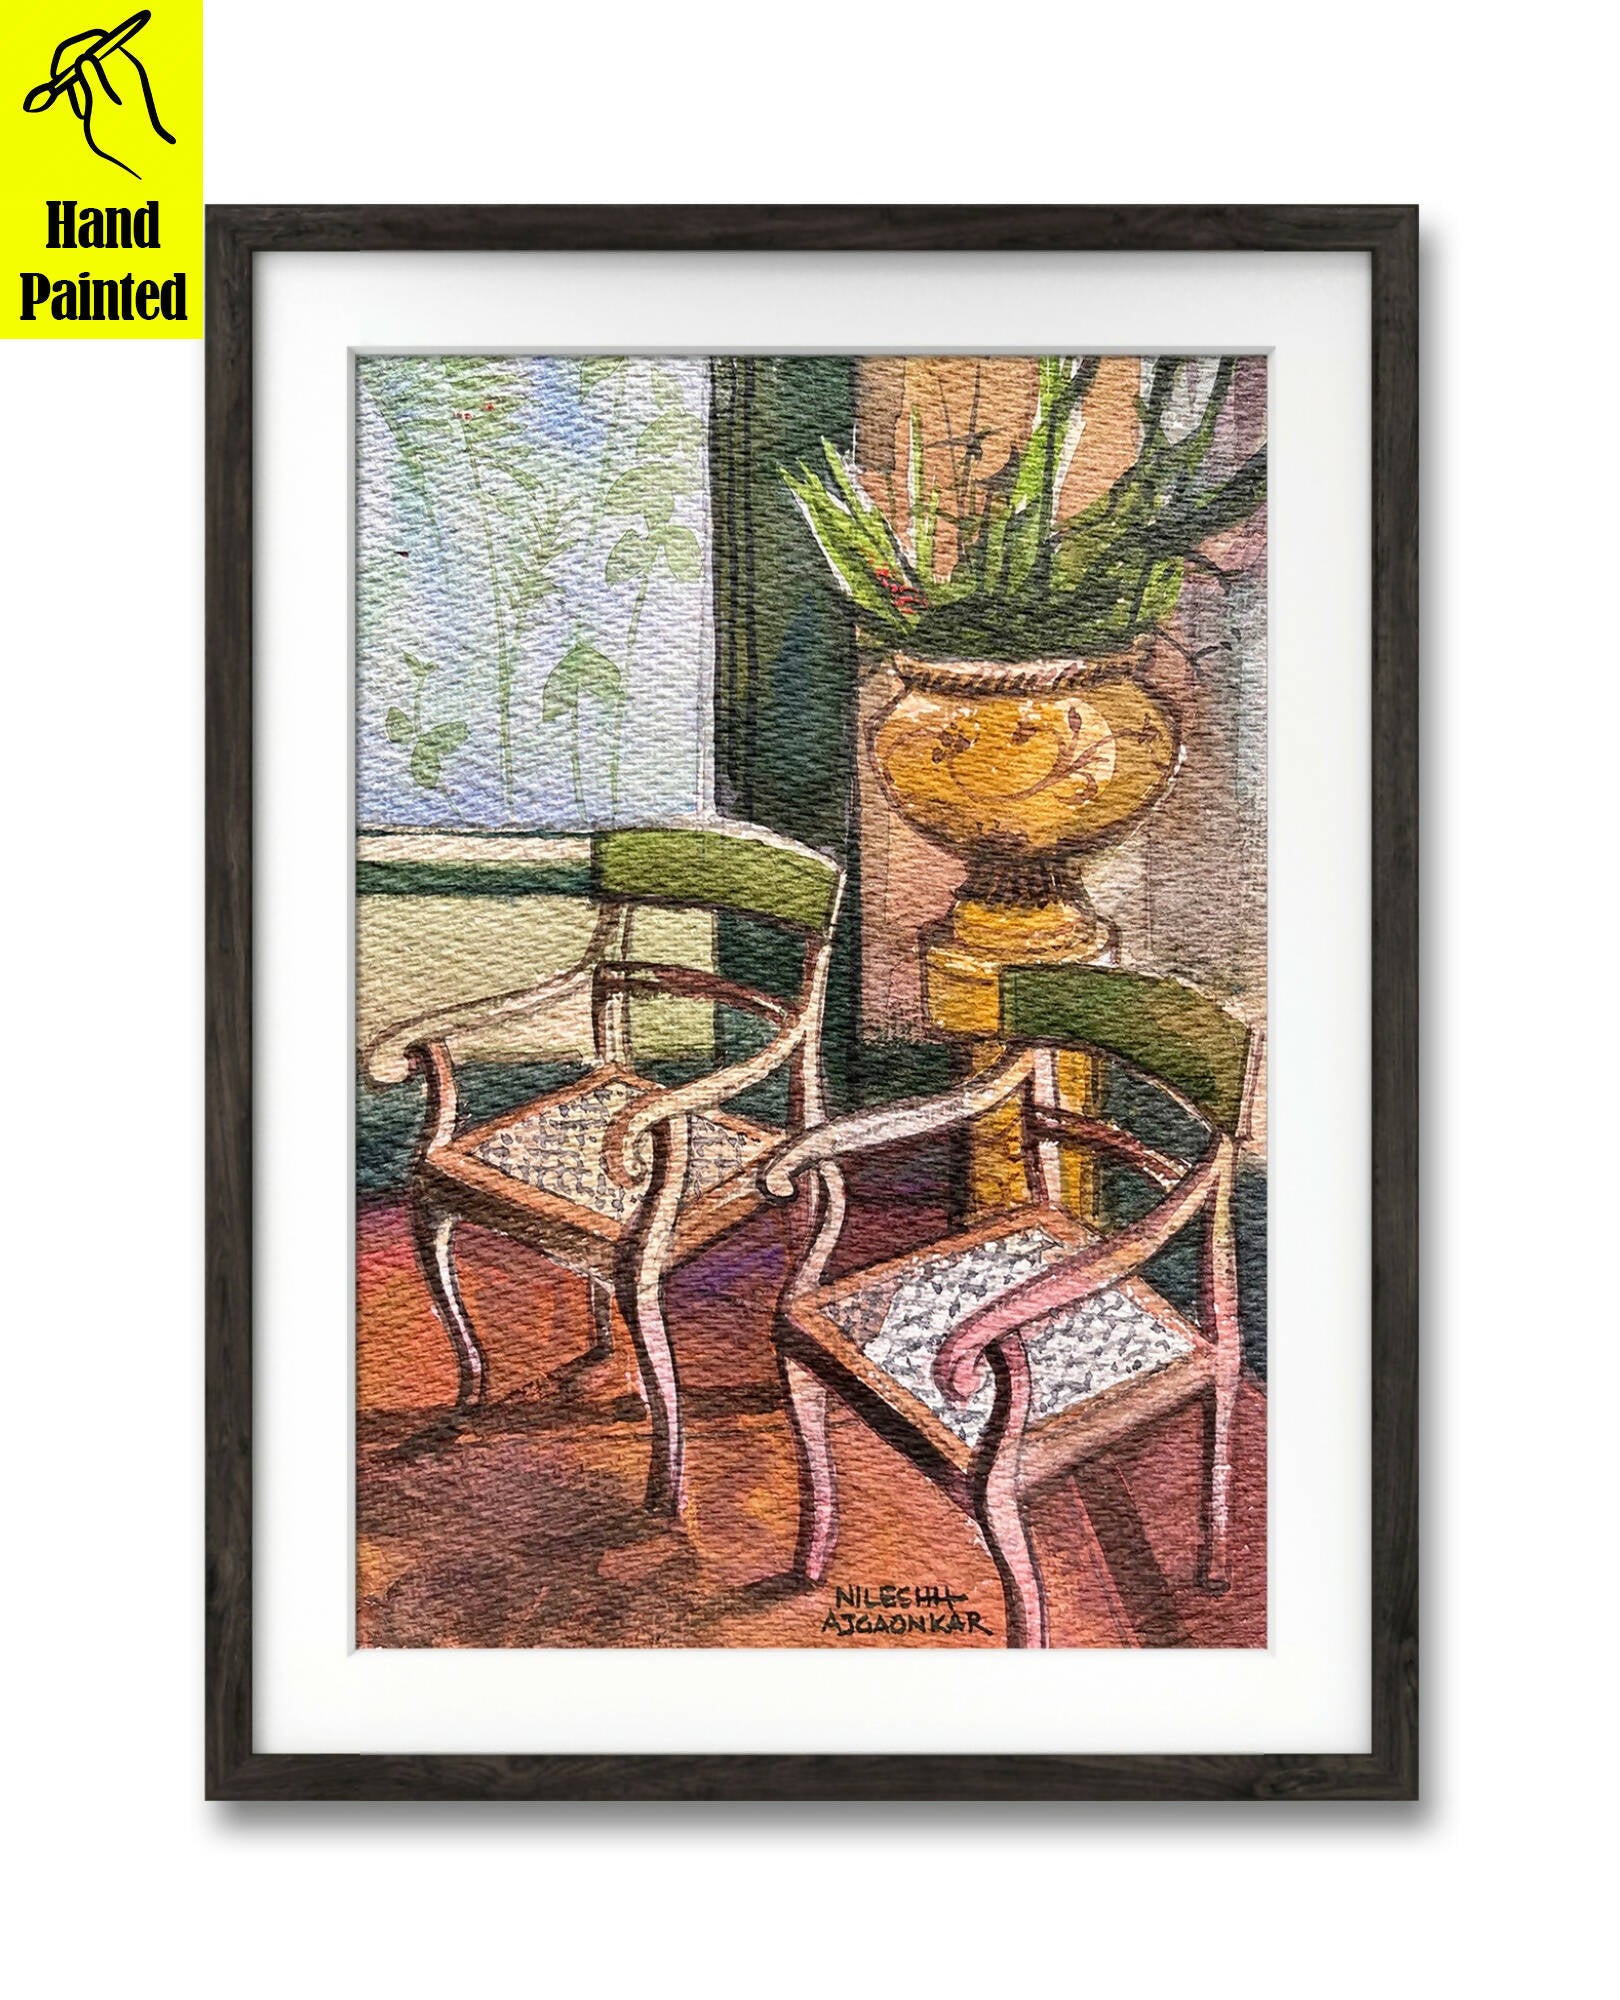 Title: Two chairs'